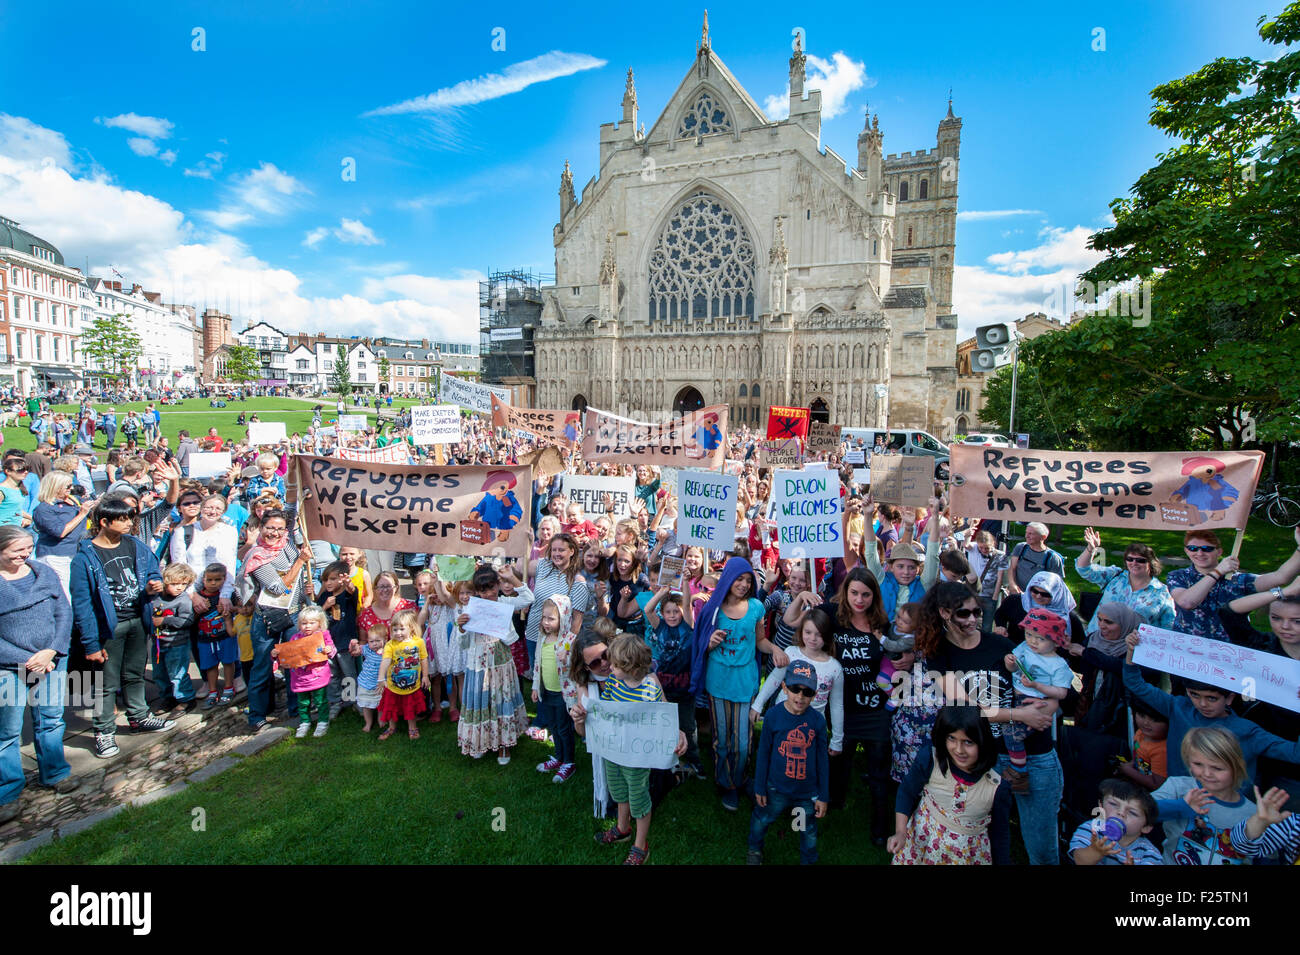 Exeter, Devon, UK. 12th Sep, 2015. The big crowd hold up their signs  and cheer during the Exeter Solidarity With Refugees Event outside the west front of Exeter Cathedral Credit:  Clive Chilvers/Alamy Live News Stock Photo